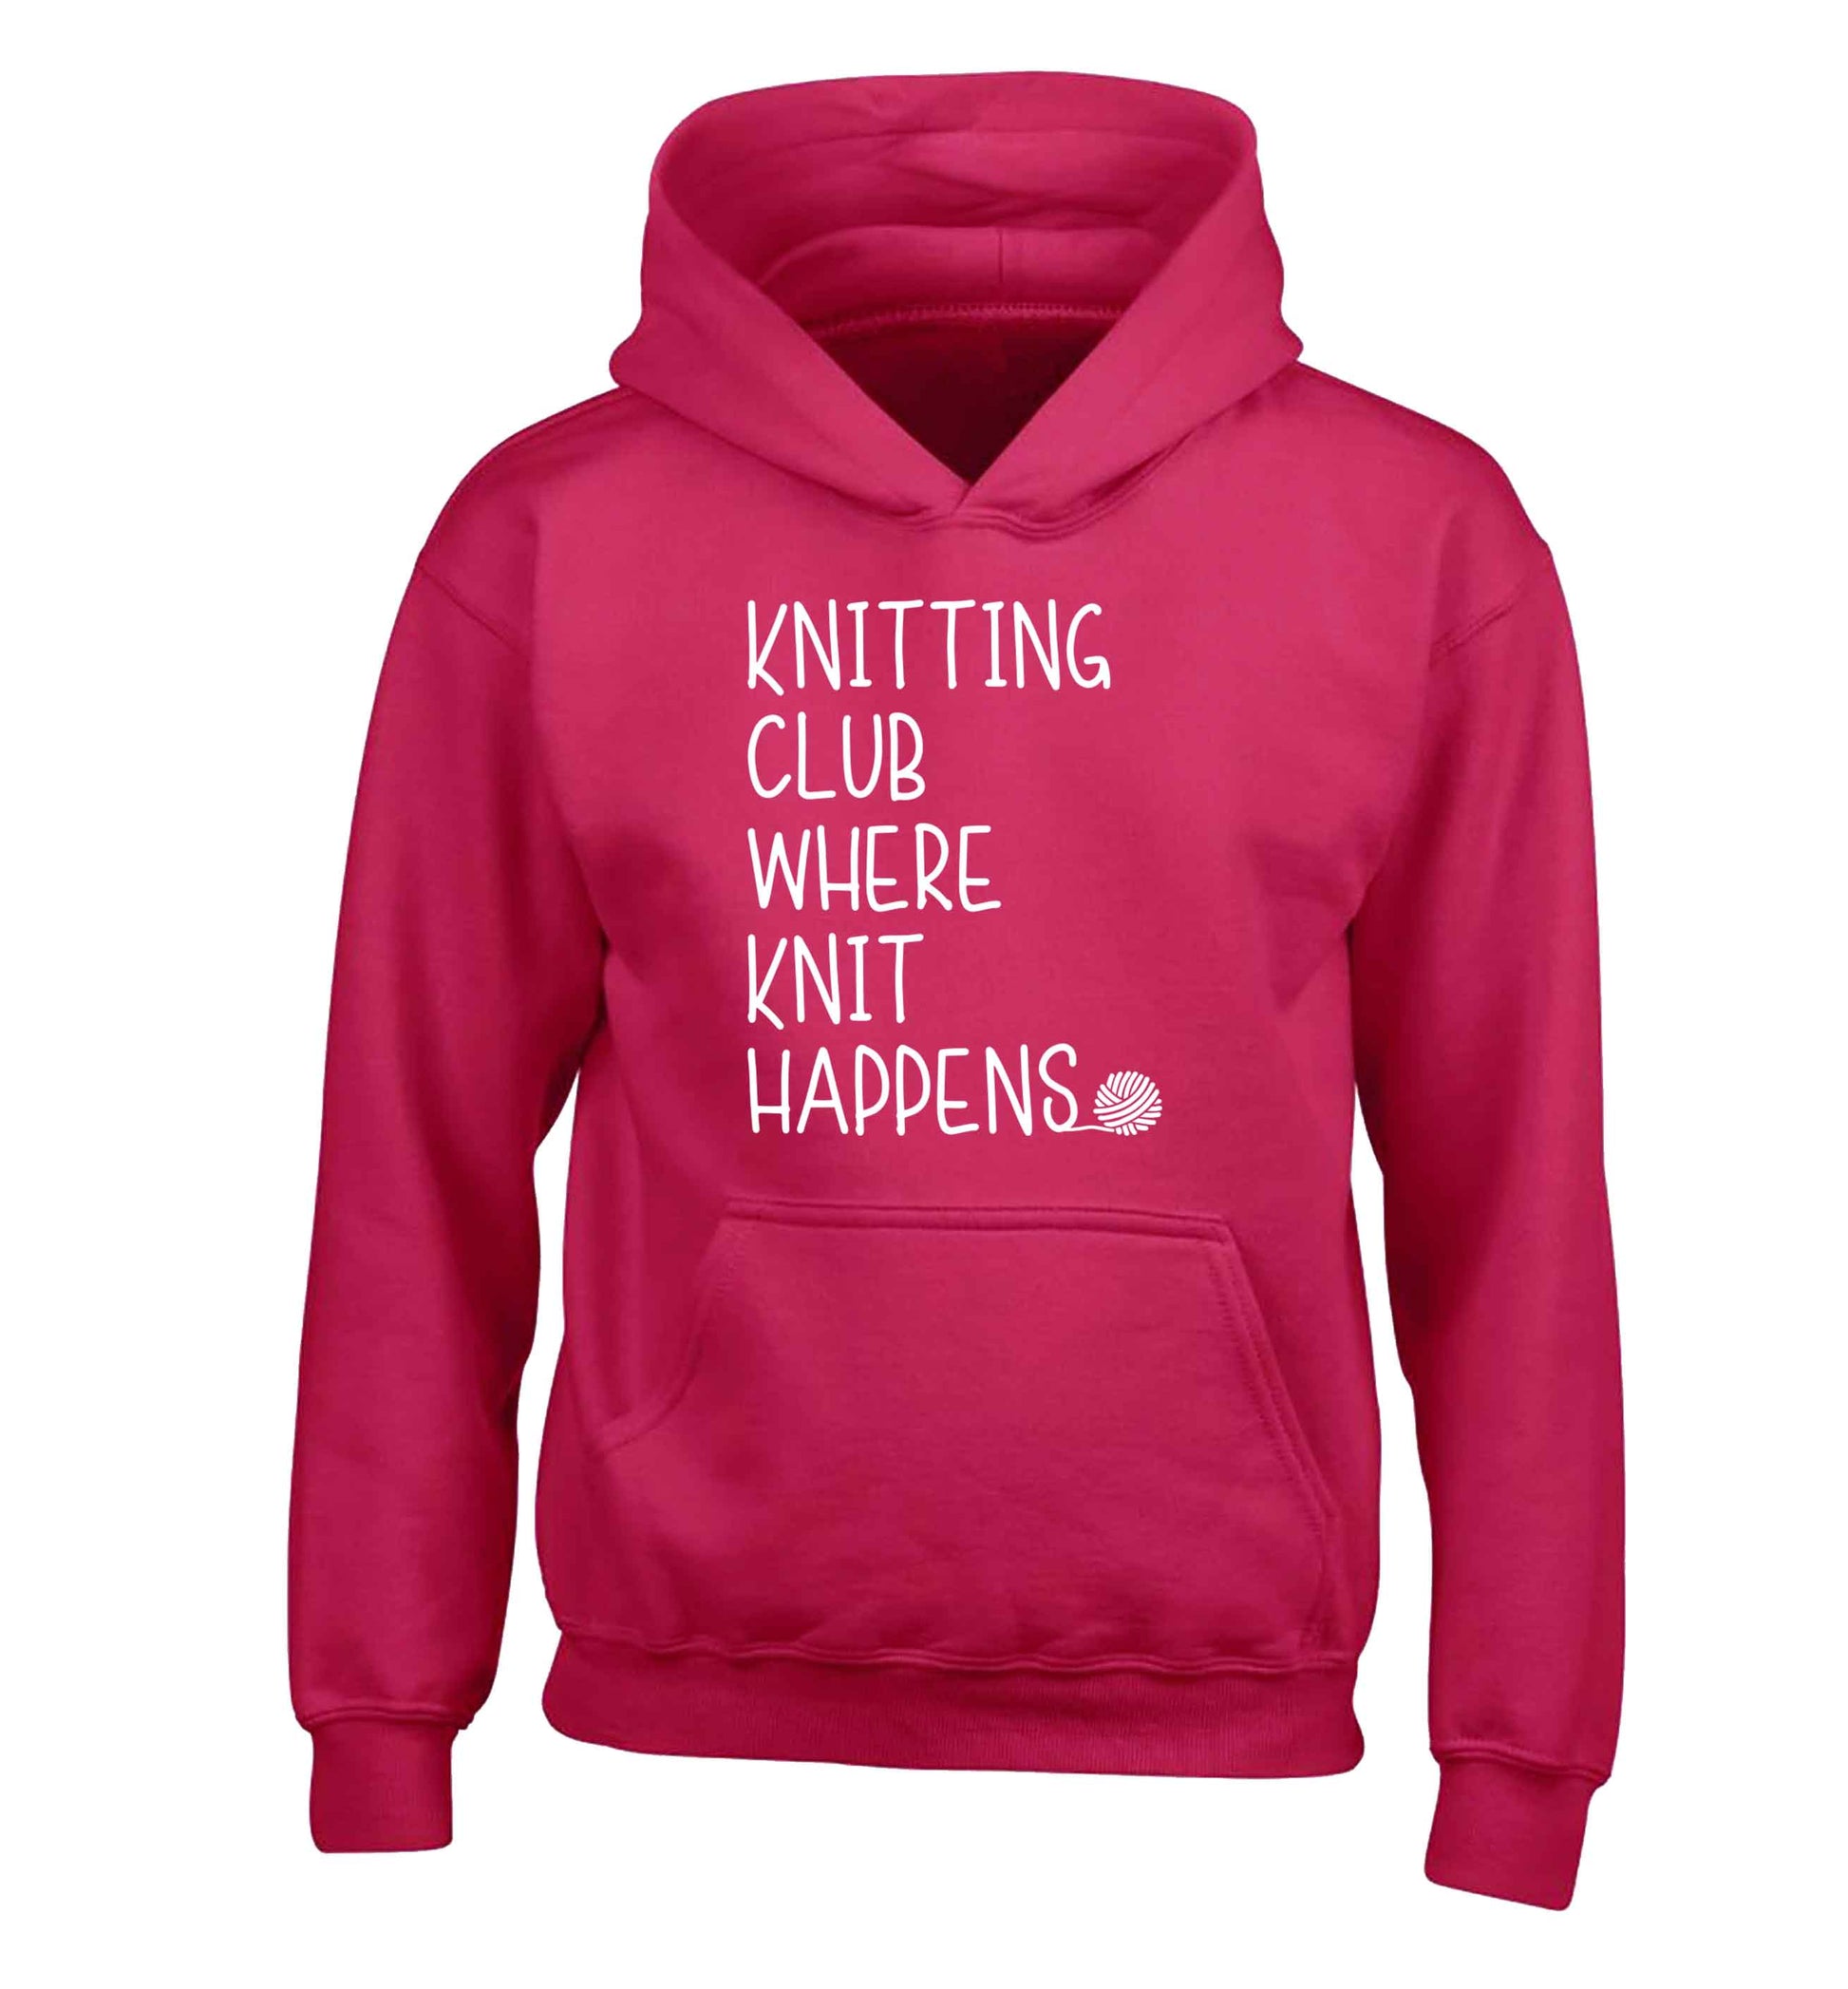 Knitting club where knit happens children's pink hoodie 12-13 Years